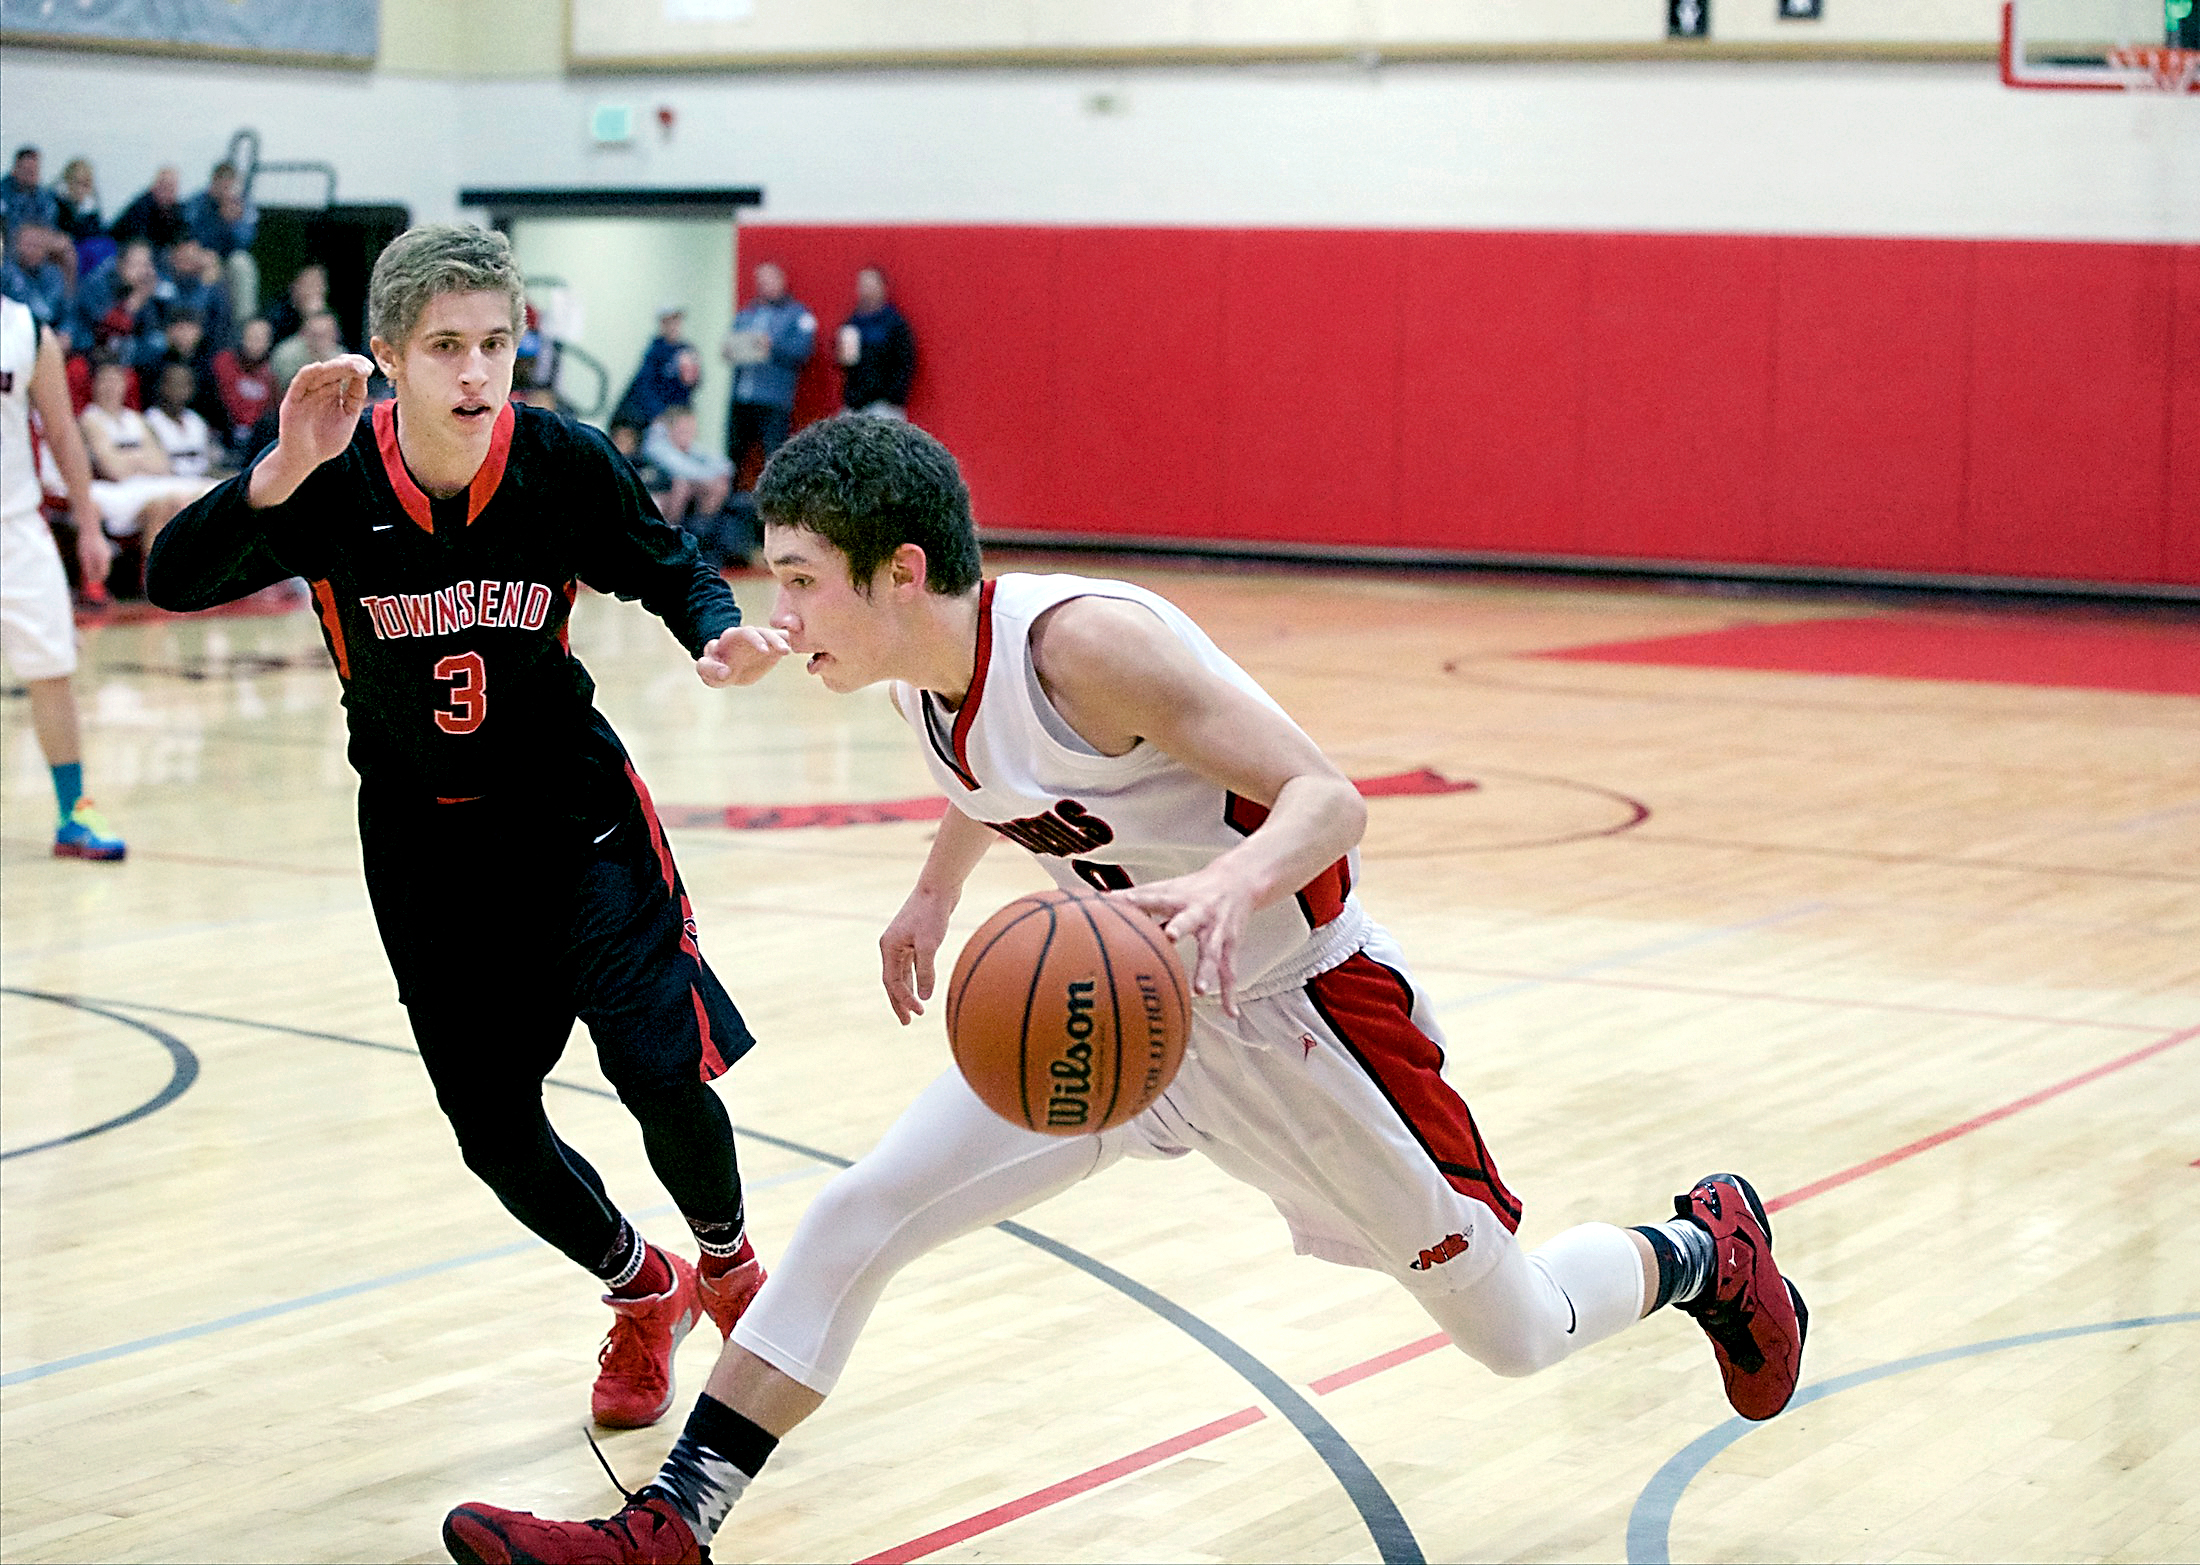 Neah Bay's Jericho McGimpsey drives against Port Townsend's Jacob Ralls (3) during a Crush in the Slush tournament game in Port Townsend. The Red Devils rallied from early deficits to win twice at the tournament. Steve Mullensky/for Peninsula Daily News